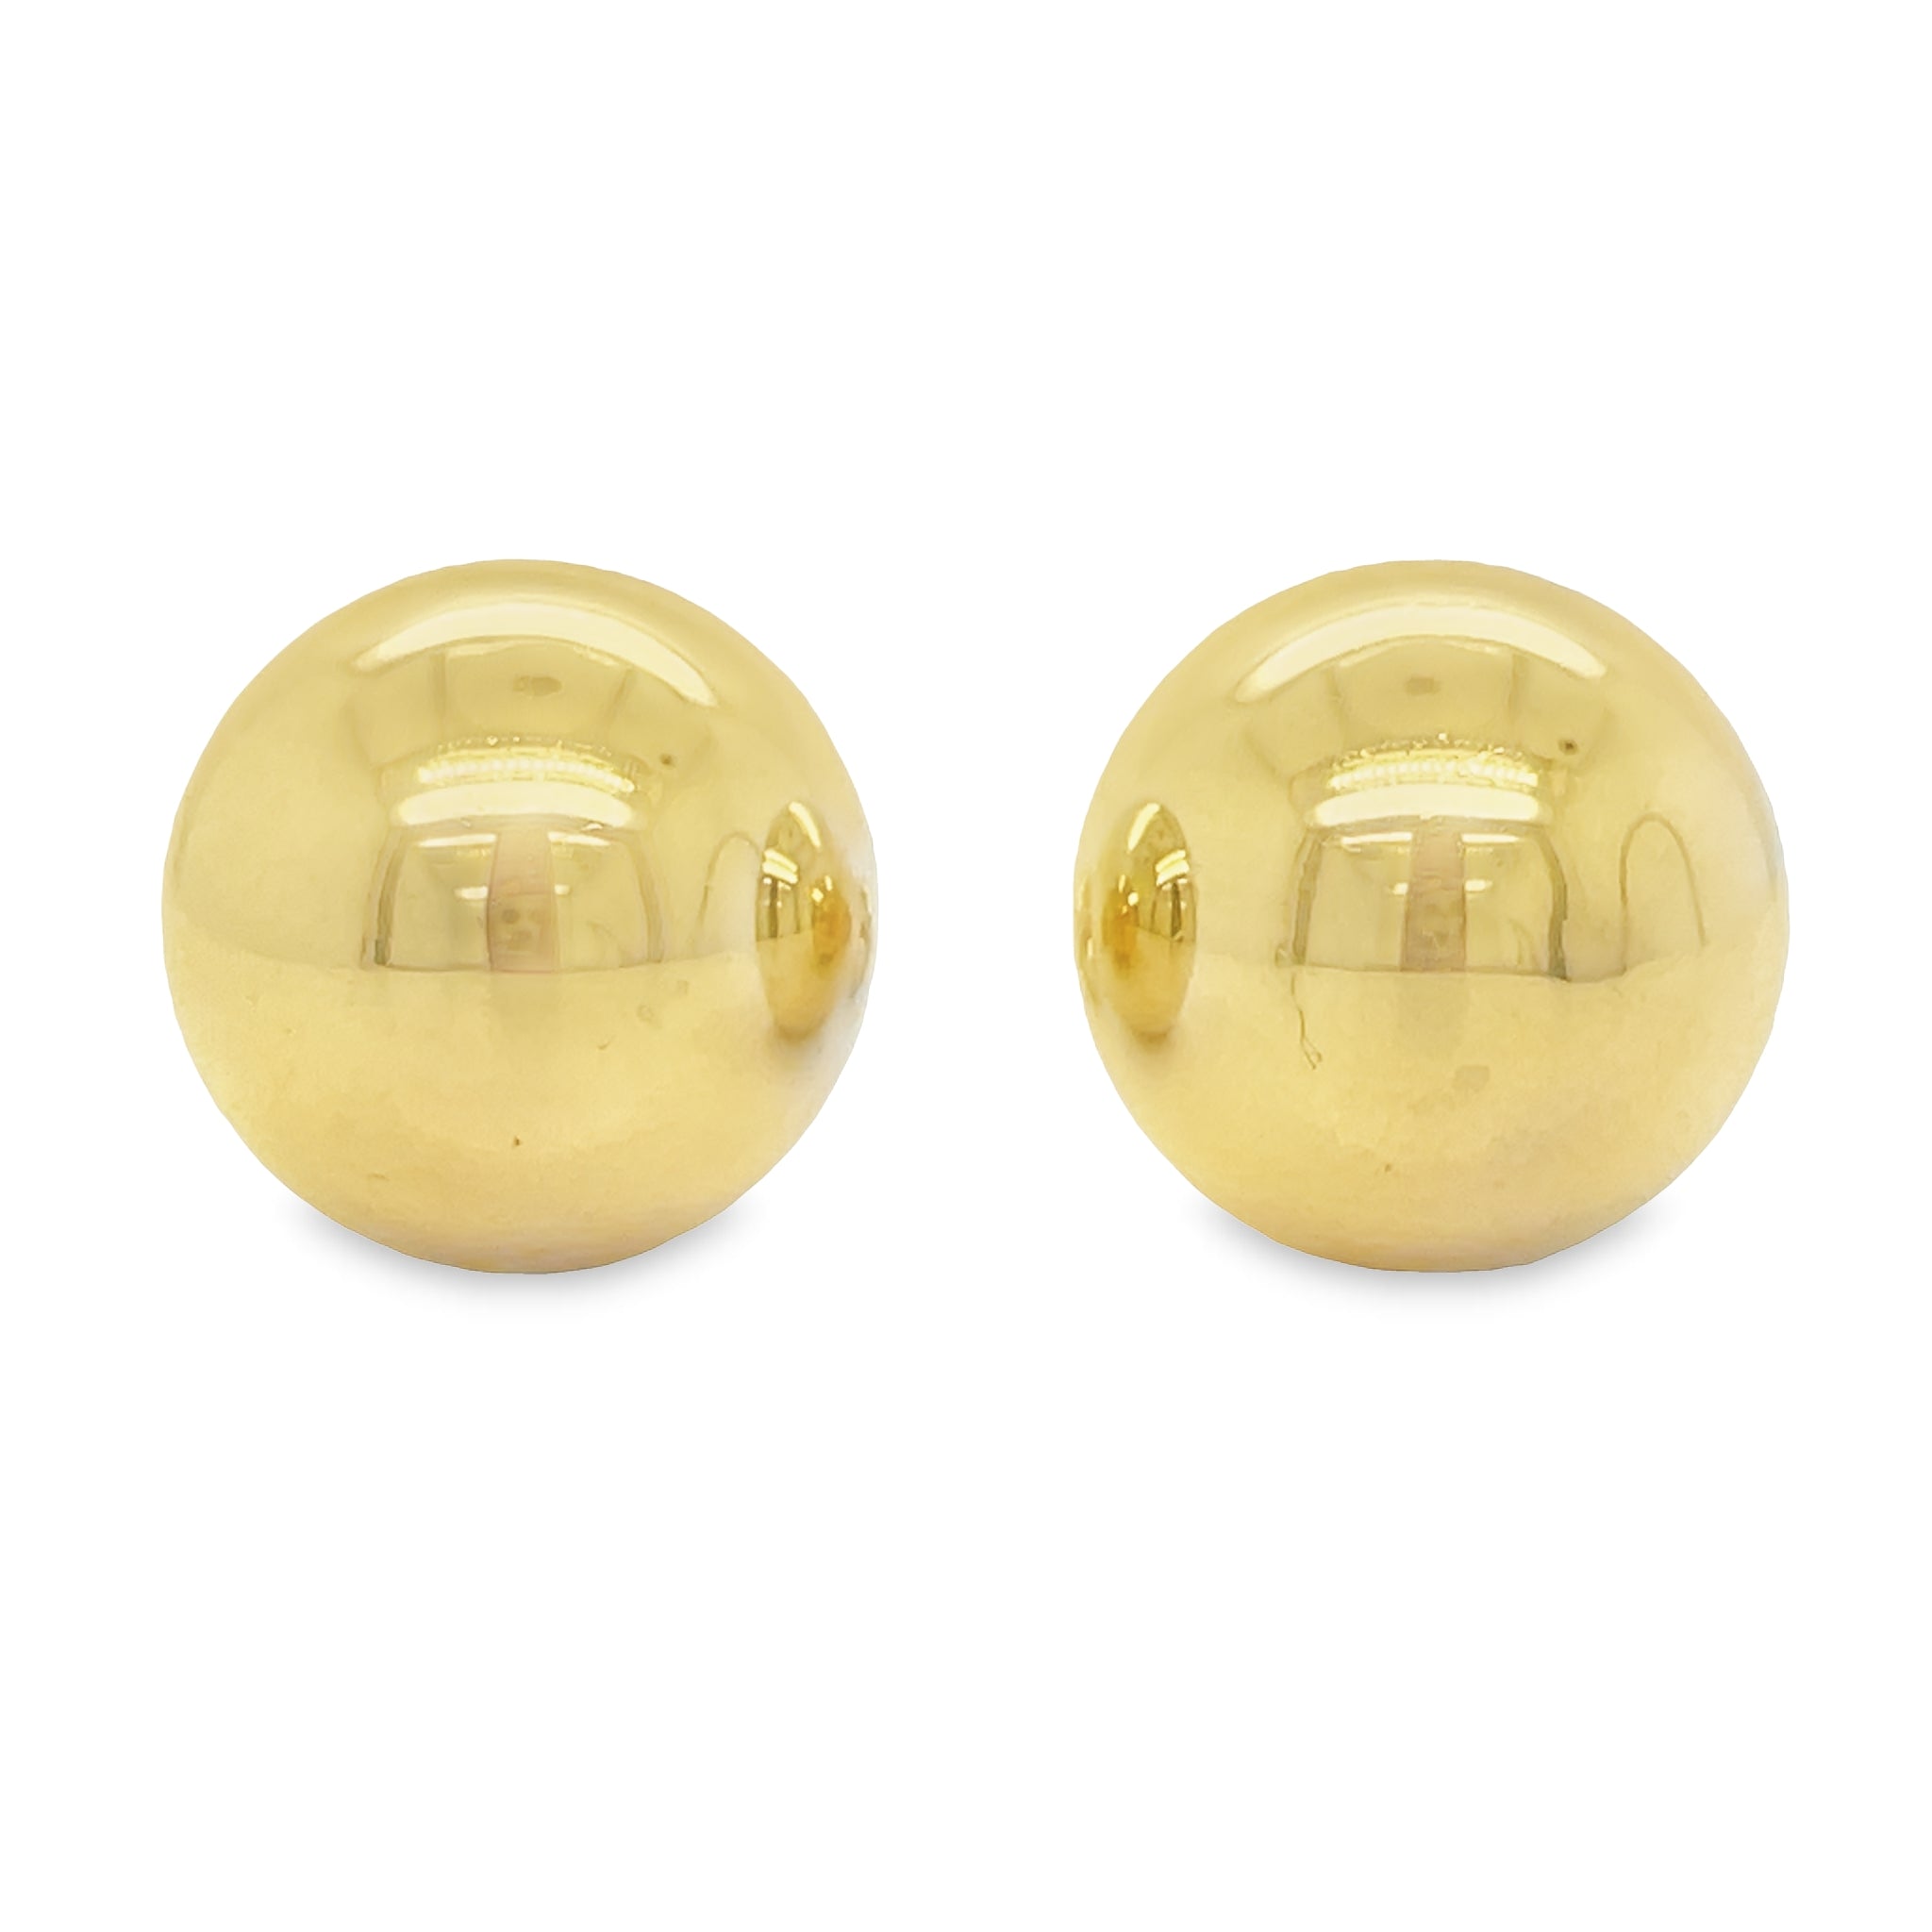 These beautiful 14k yellow gold stud earrings feature a 14mm ball with friction backs for a secure fit. Crafted from genuine 14k yellow gold, these earrings make a stunning statement piece. Perfect for any occasion.